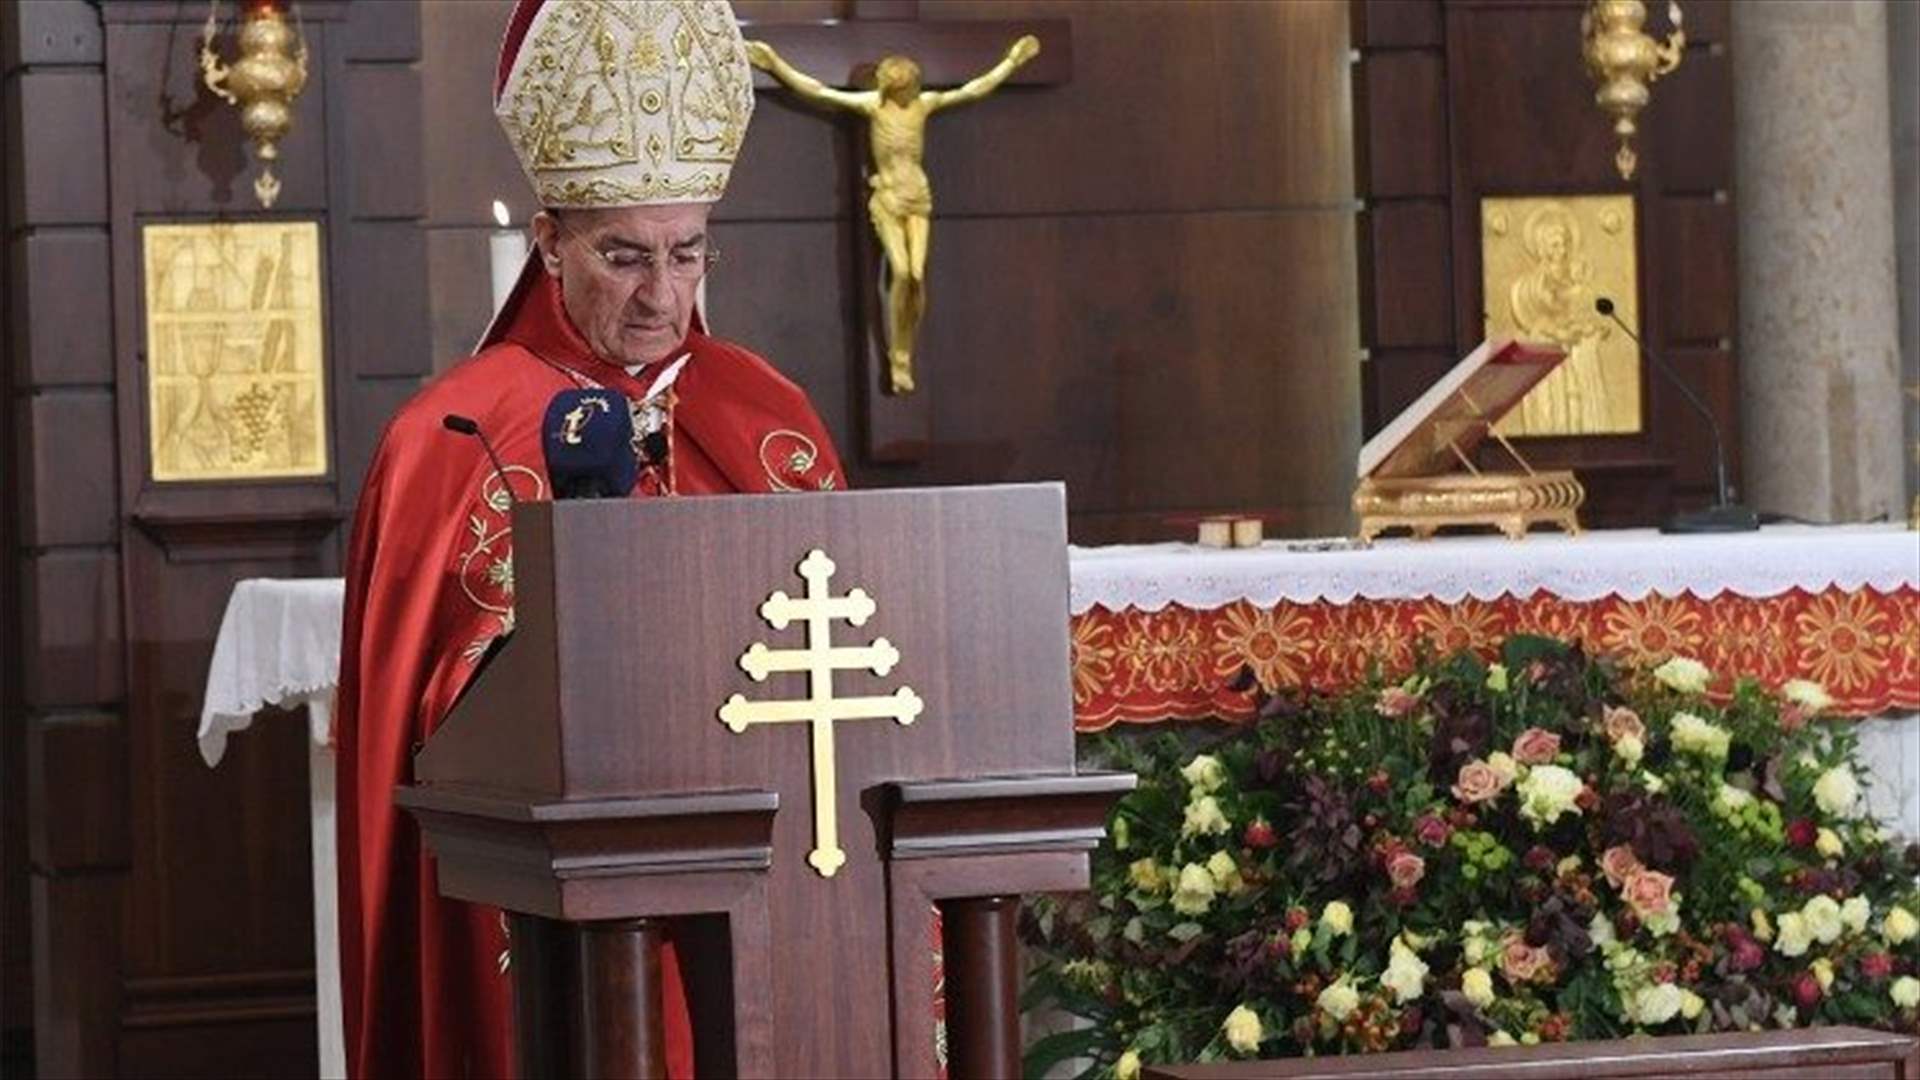 Maronite Patriarch warns politicians of neglecting conscience, urges them to elect a President